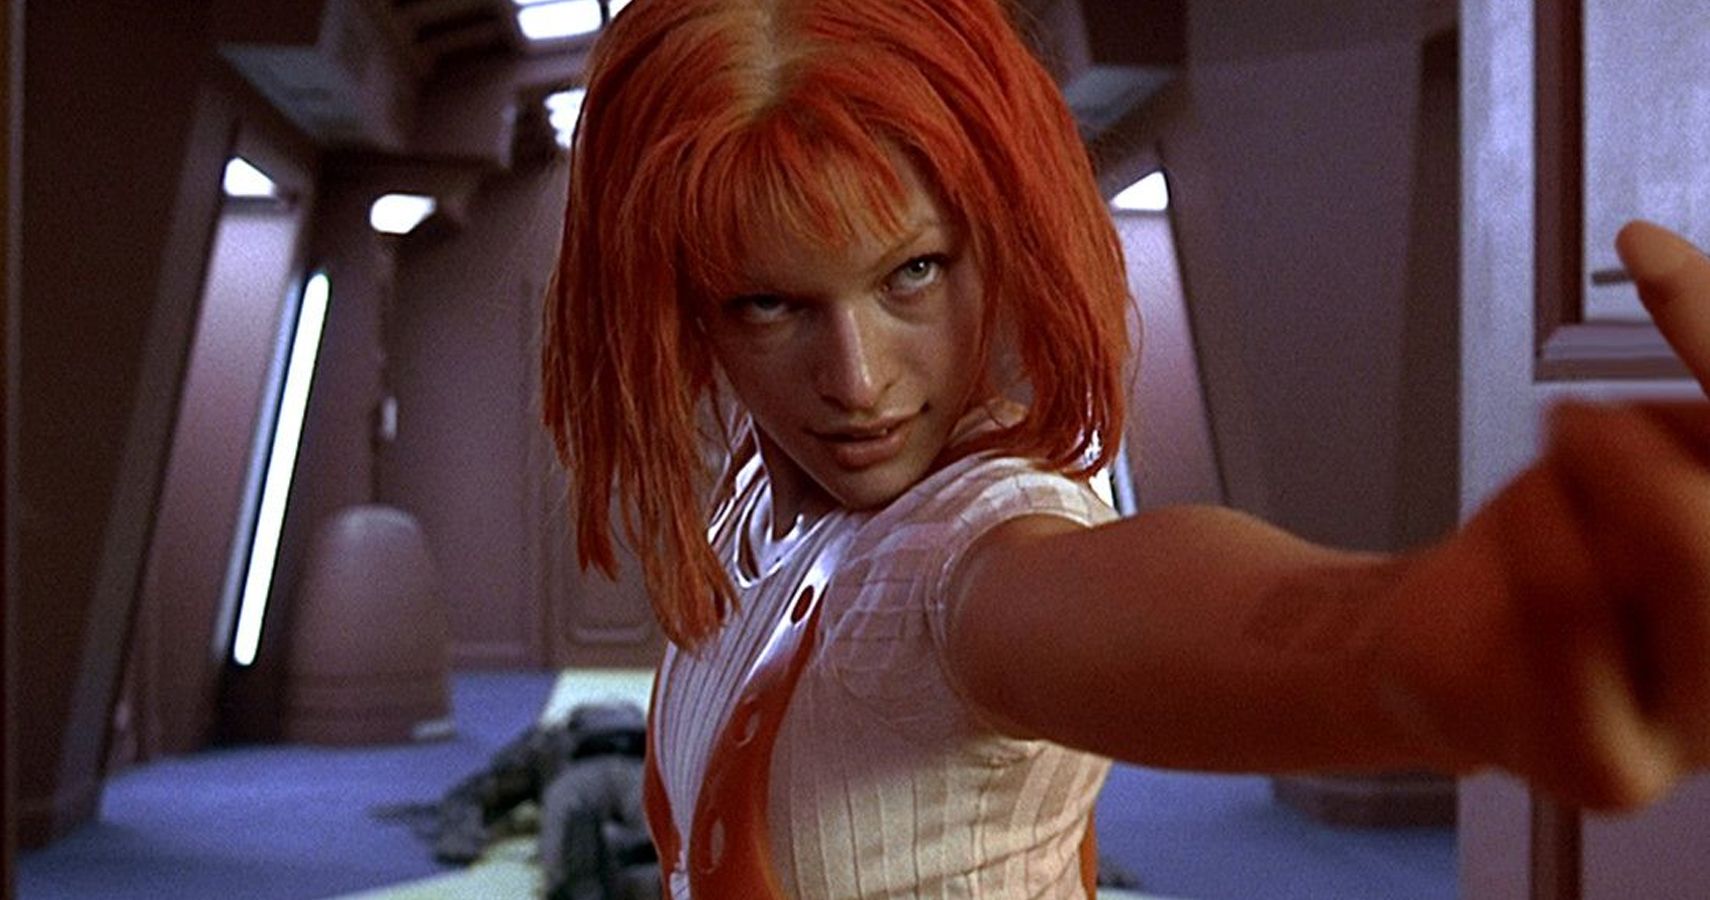 2. "The Fifth Element" (1997) - wide 2